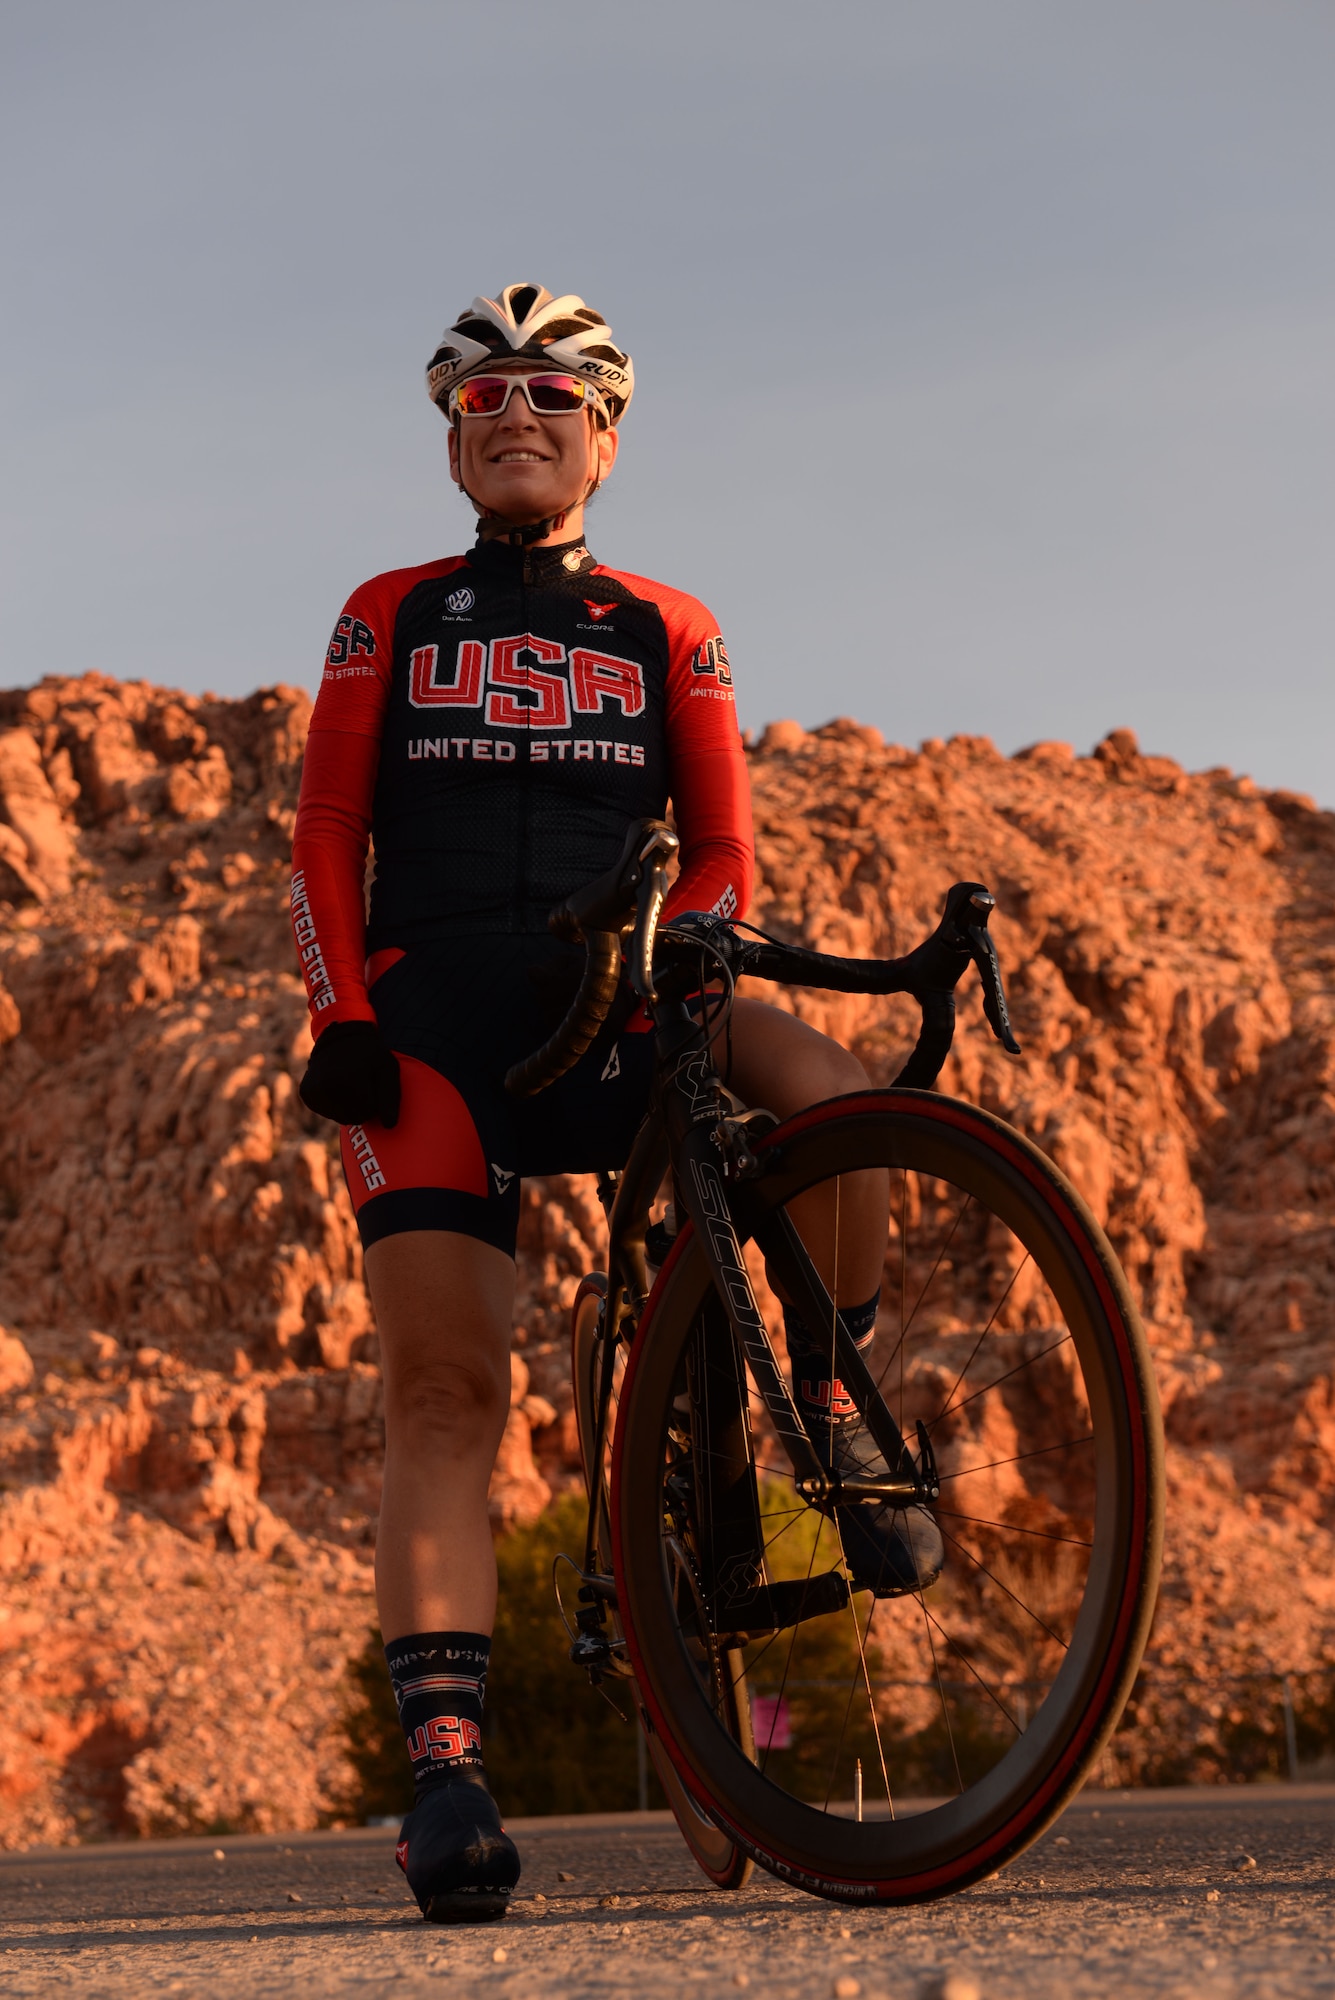 (Maj.) Dr. Shannon Gaffney, 99th Medical Group staff radiologist, poses for a photo before riding her bike through the Calico Basin in Las Vegas, Nov. 18, 2015. On Oct. 6 and 8, 2015 Gaffney raced as a member of the U.S. Armed Forces Cycling Team for the Military World Games. Gaffney was the top U.S. finisher in the women’s cycling road race. (U.S. Air Force photo by Airman 1st Class Rachel Loftis)